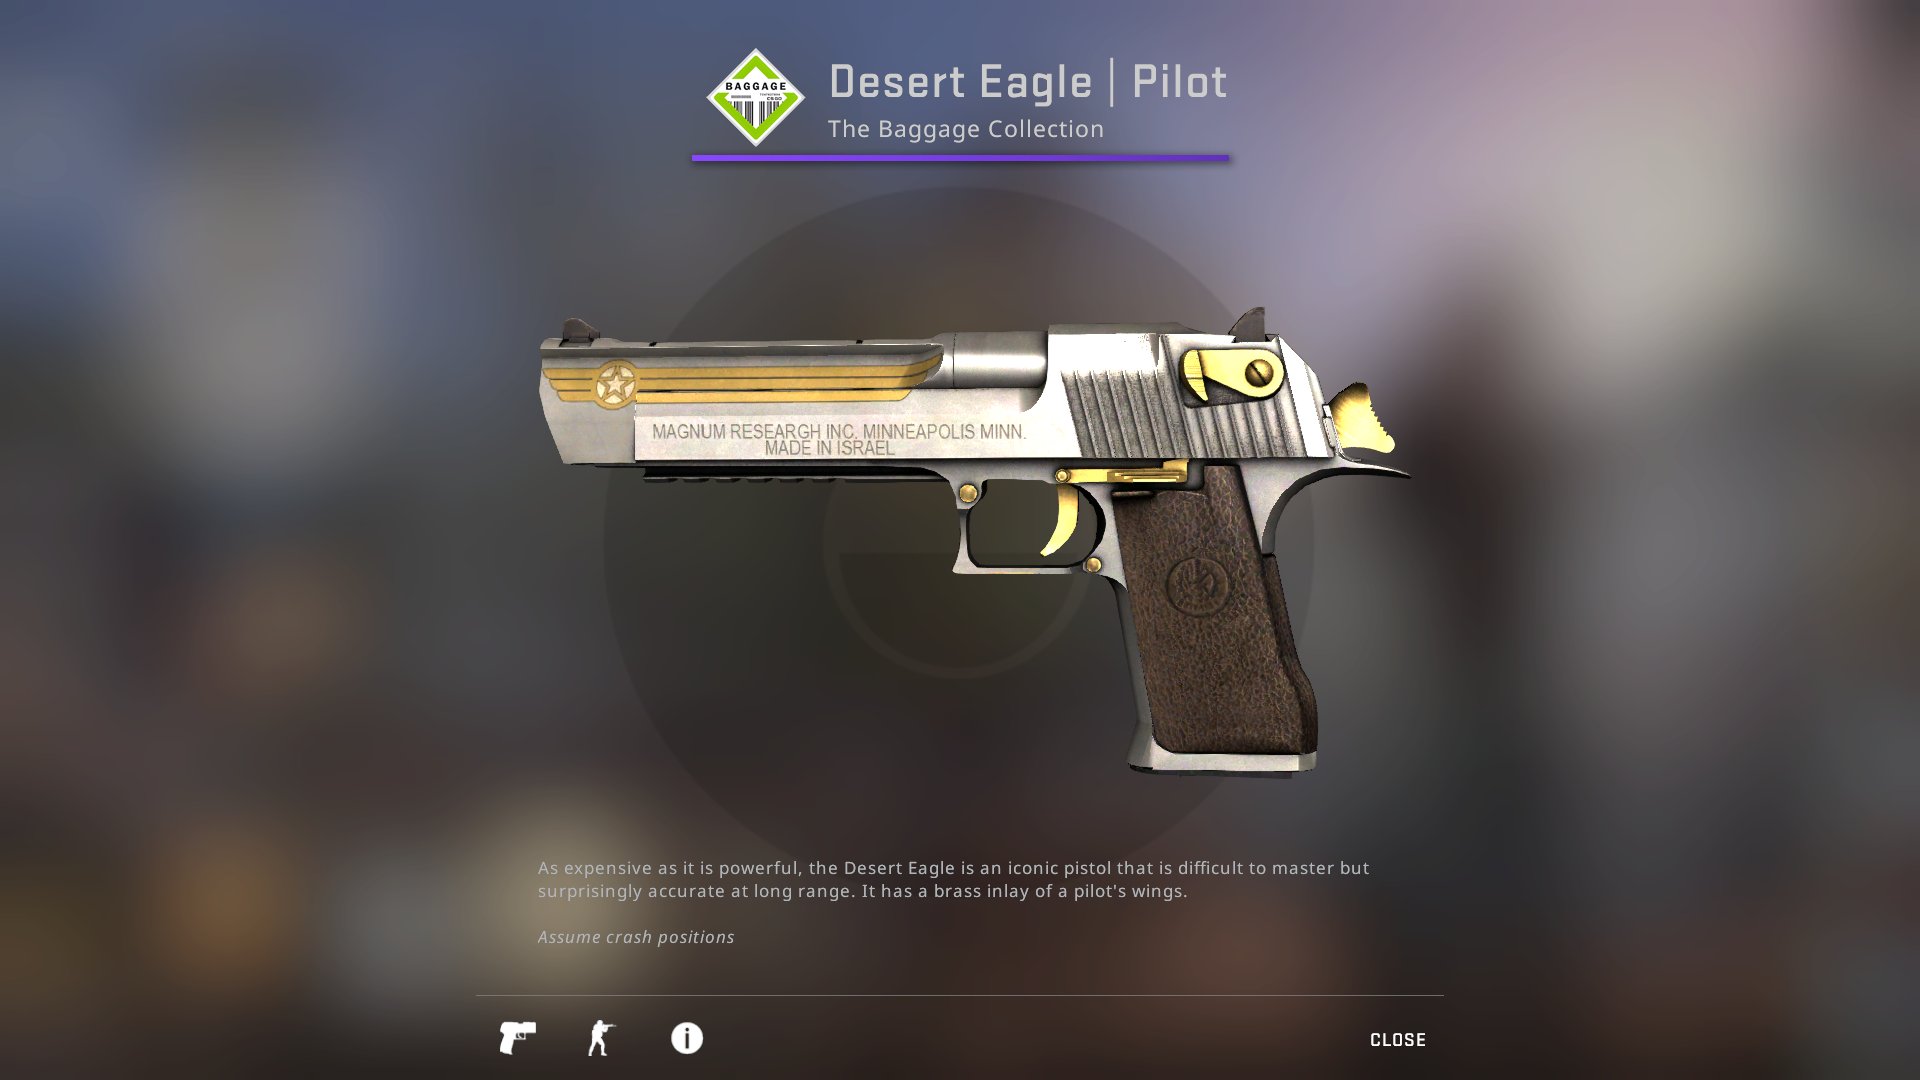 Ra 🇧🇪 on Twitter: "🛩️ Desert Eagle | Pilot 🛩️ One of the best skins in the game &amp; most people don't even know it exist 👀 A Factory New version